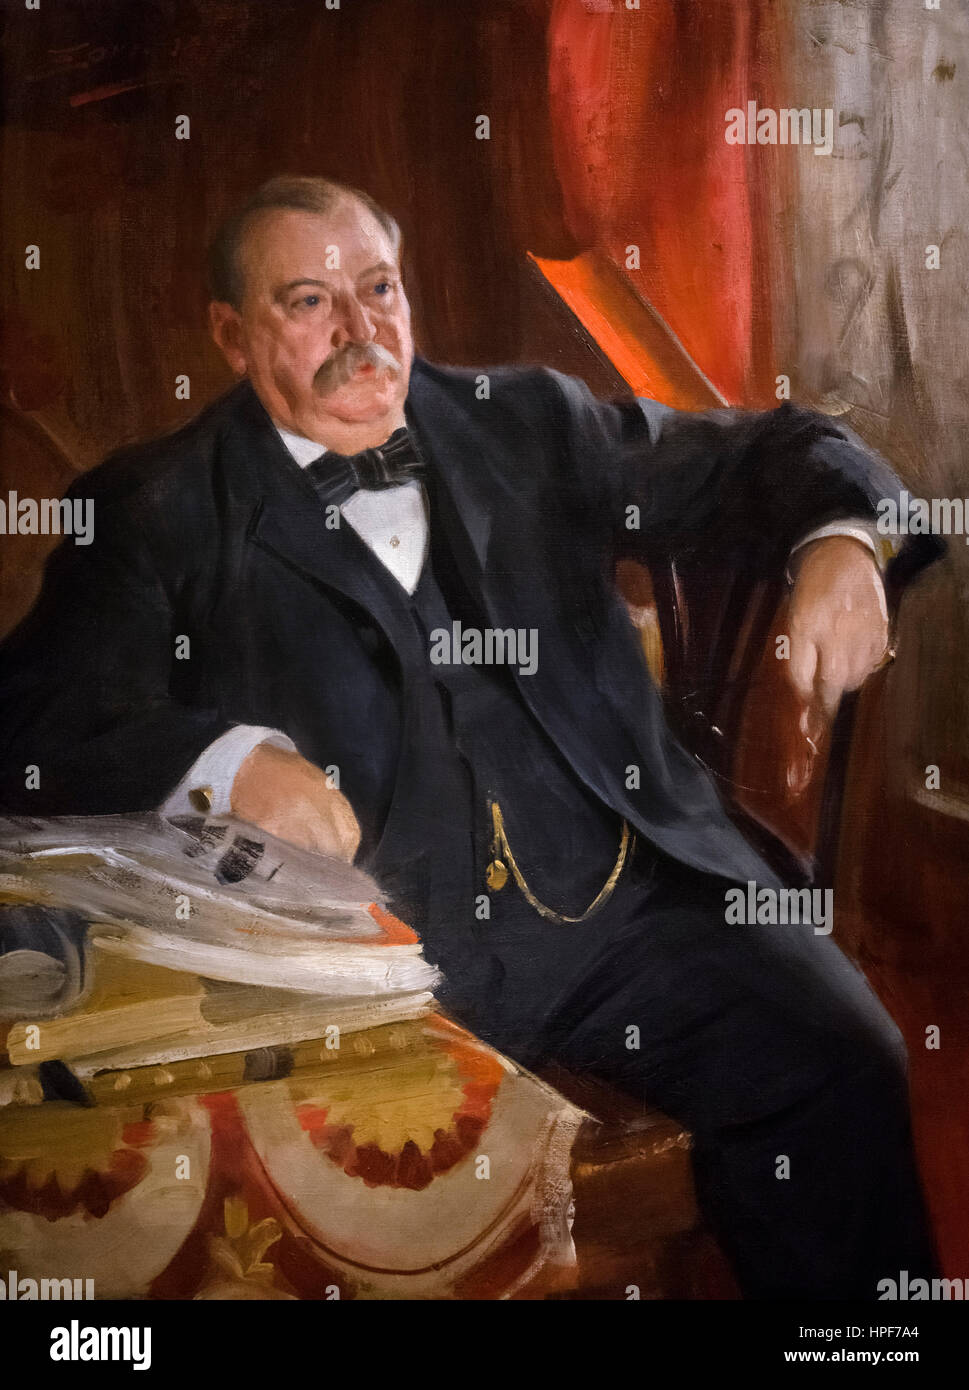 Grover Cleveland. Portrait of the 22nd and 24th  US President, Grover Cleveland (1847-1908) by Anders Zorn, oil on canvas, 1899. Stock Photo